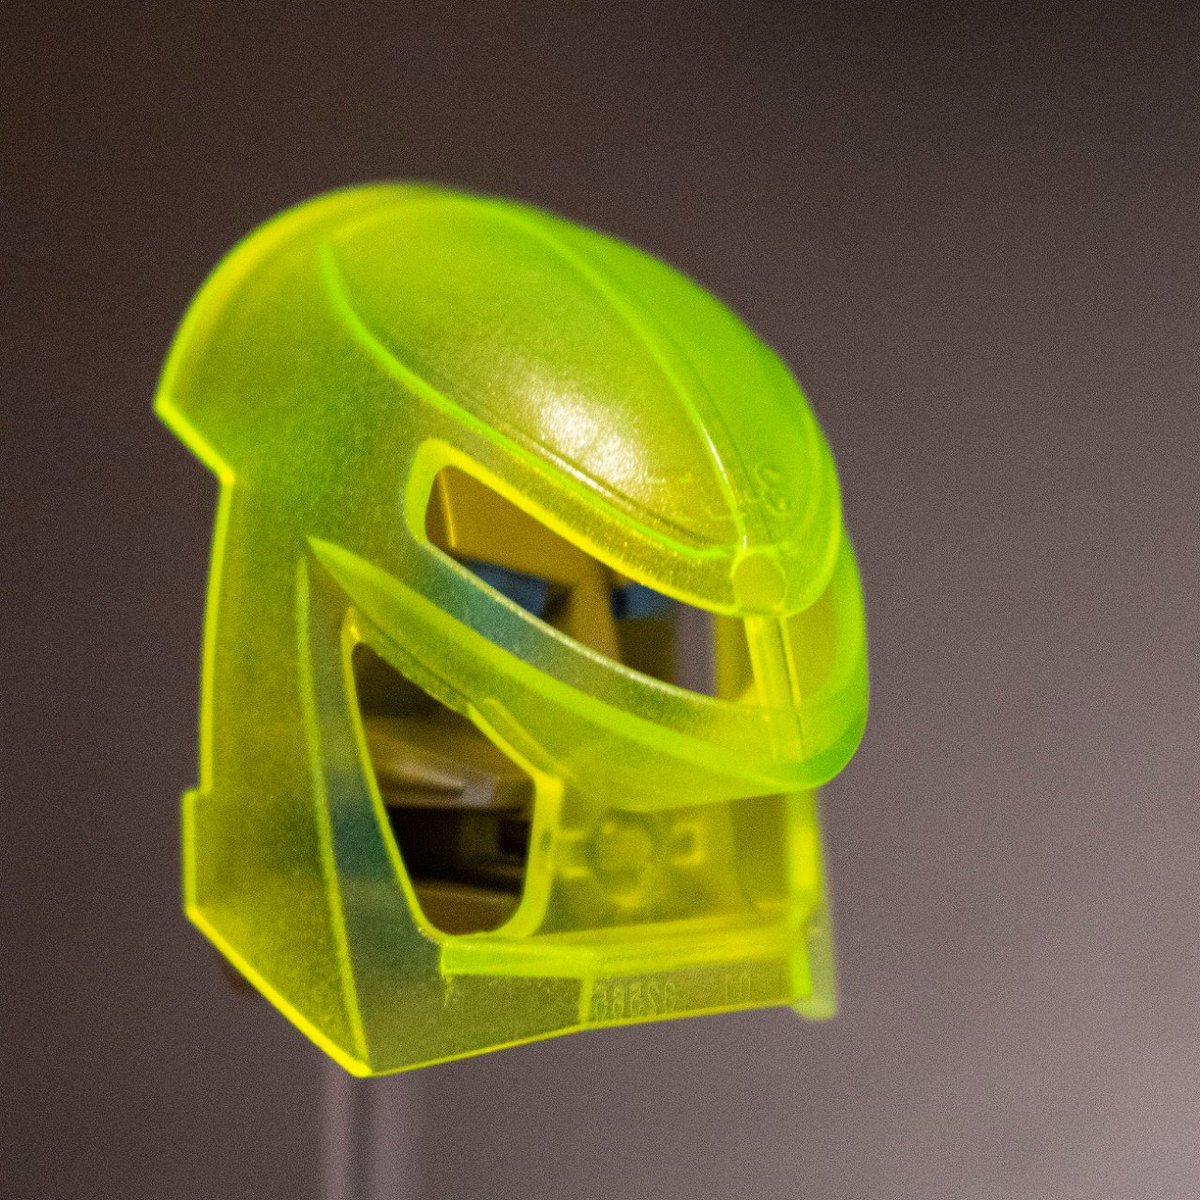 man now I'm just thinking about rare bionicle masksbehold the legendary TNGM: The Trans Neon Green Miru: The Coolest Maskthis was originally only available through like legoland promotions or something